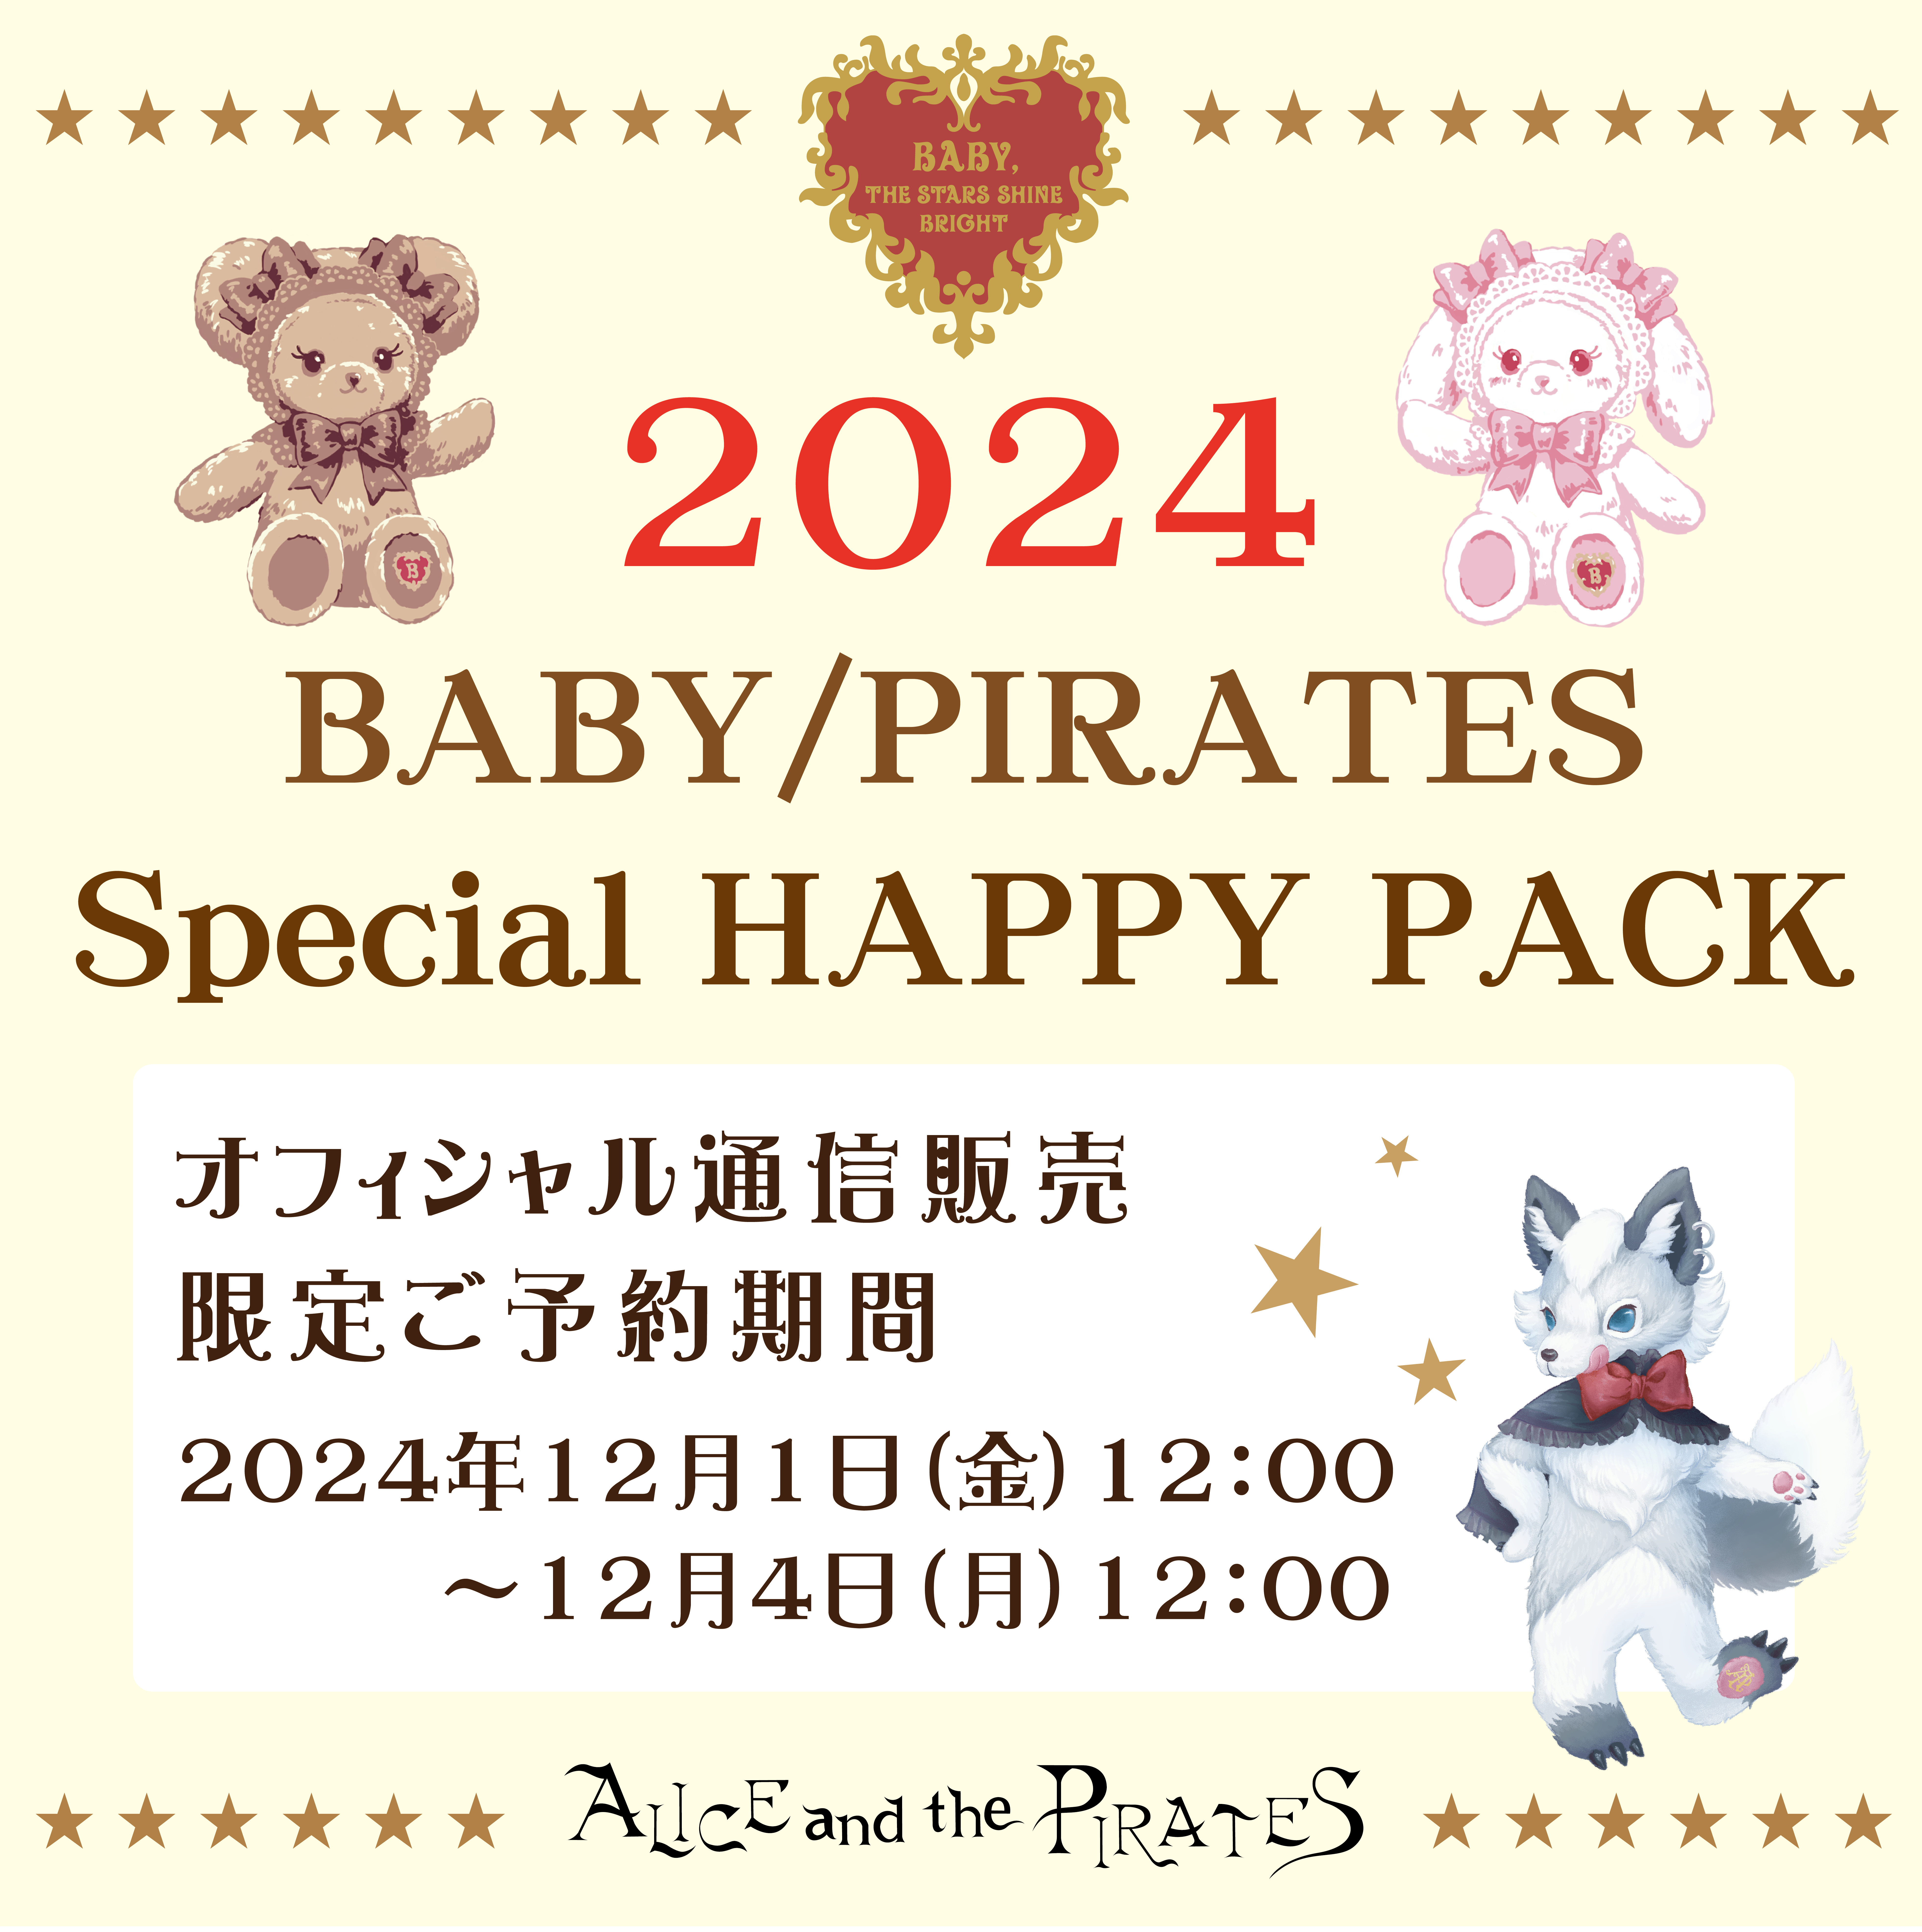 「2024 Special Happy Pack」通信販売での早期お取り扱いについて / About the reservation of 「2024 Special Happy Pack」at BABY online store